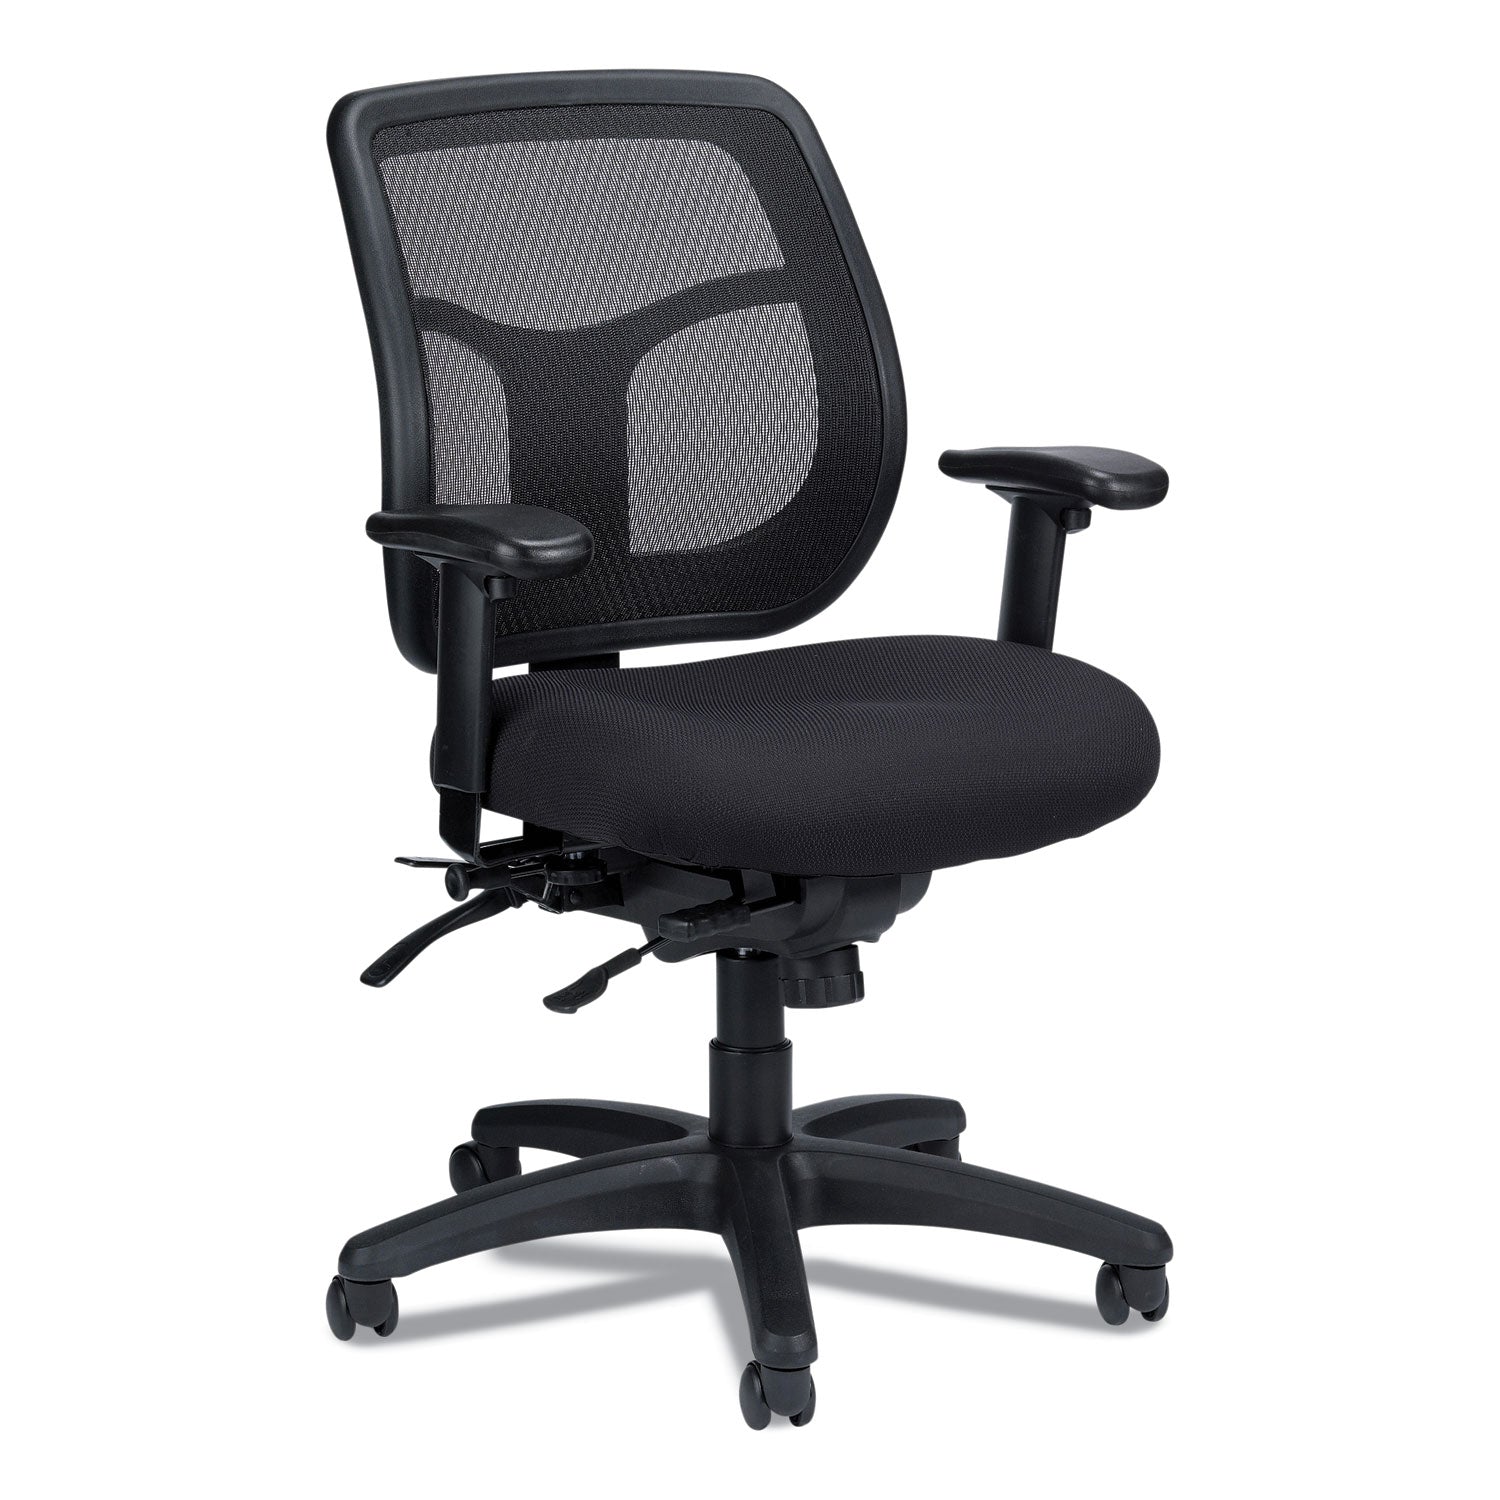 apollo-multi-function-mesh-task-chair-supports-up-to-250-lb-189-to-224-seat-height-silver-seat-back-black-base_eutmft945sl - 3